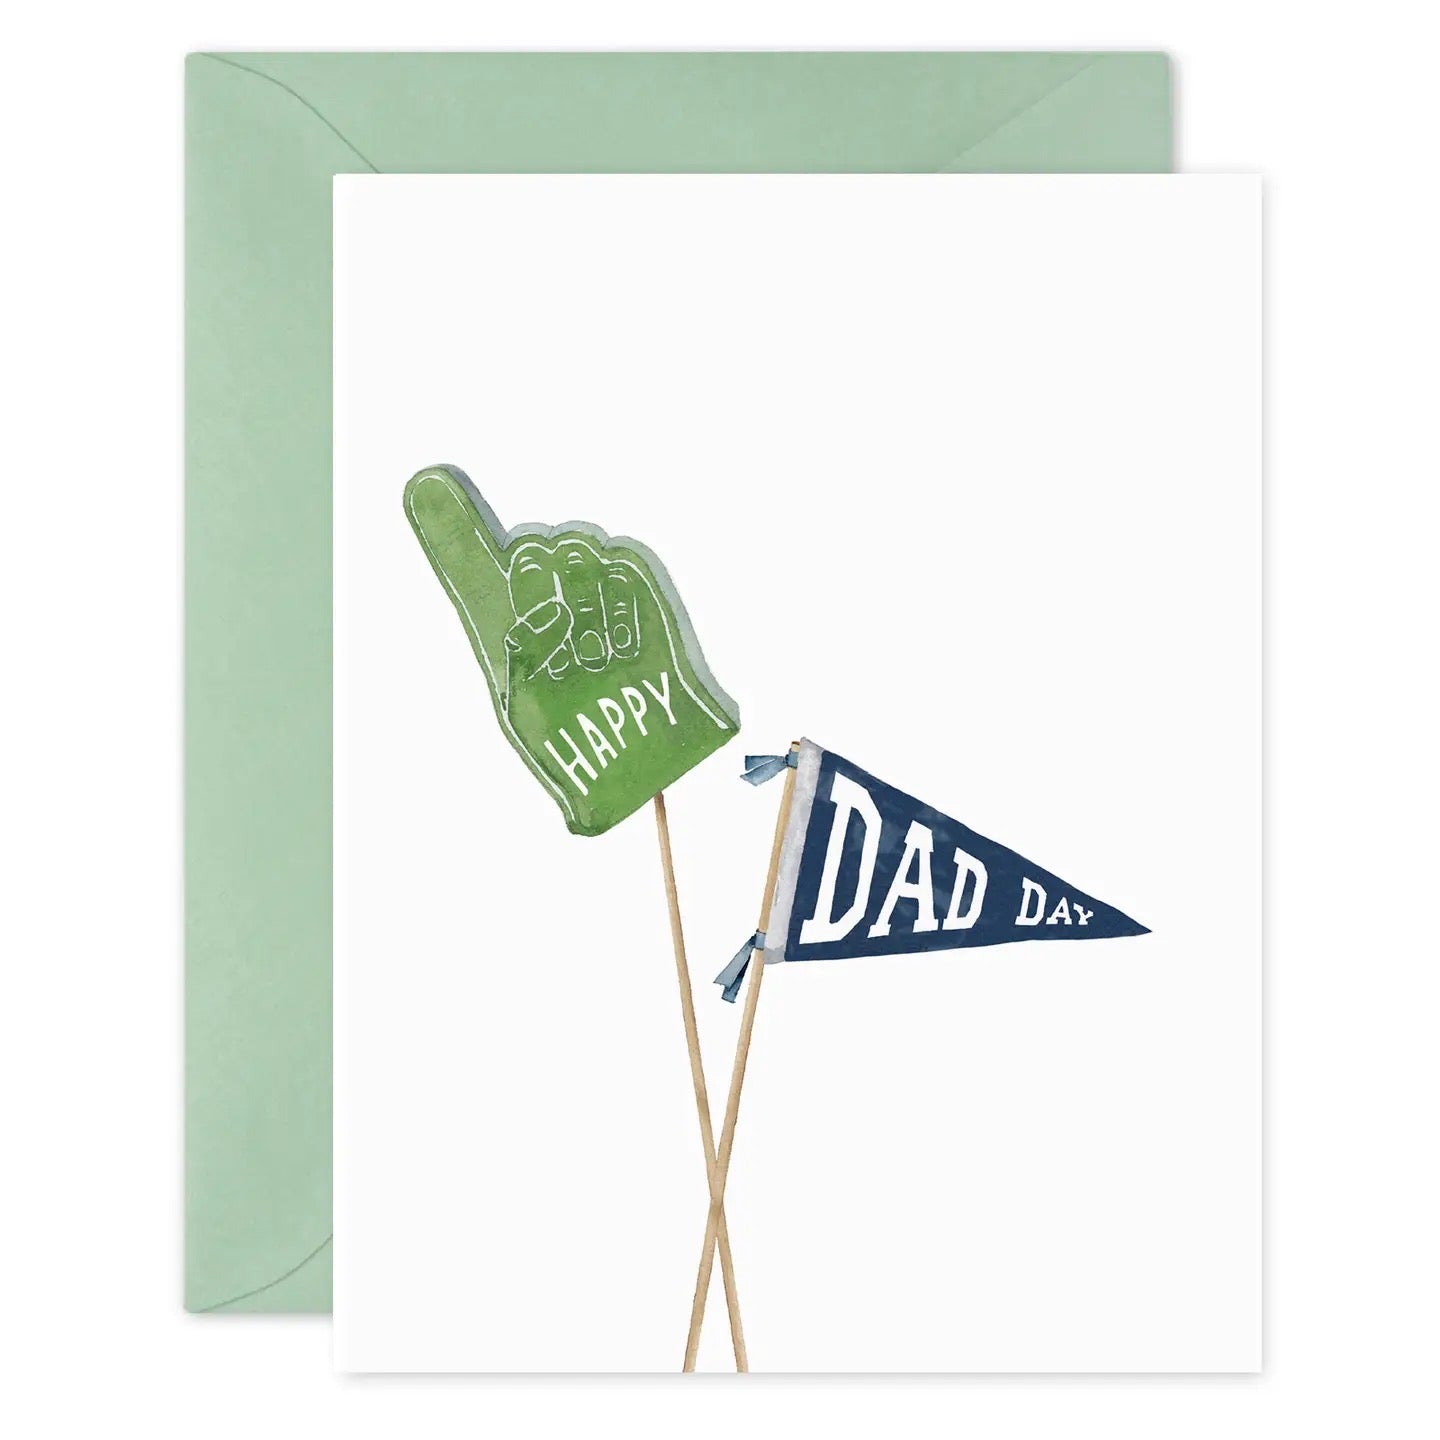 Happy Dad Day Greeting Card